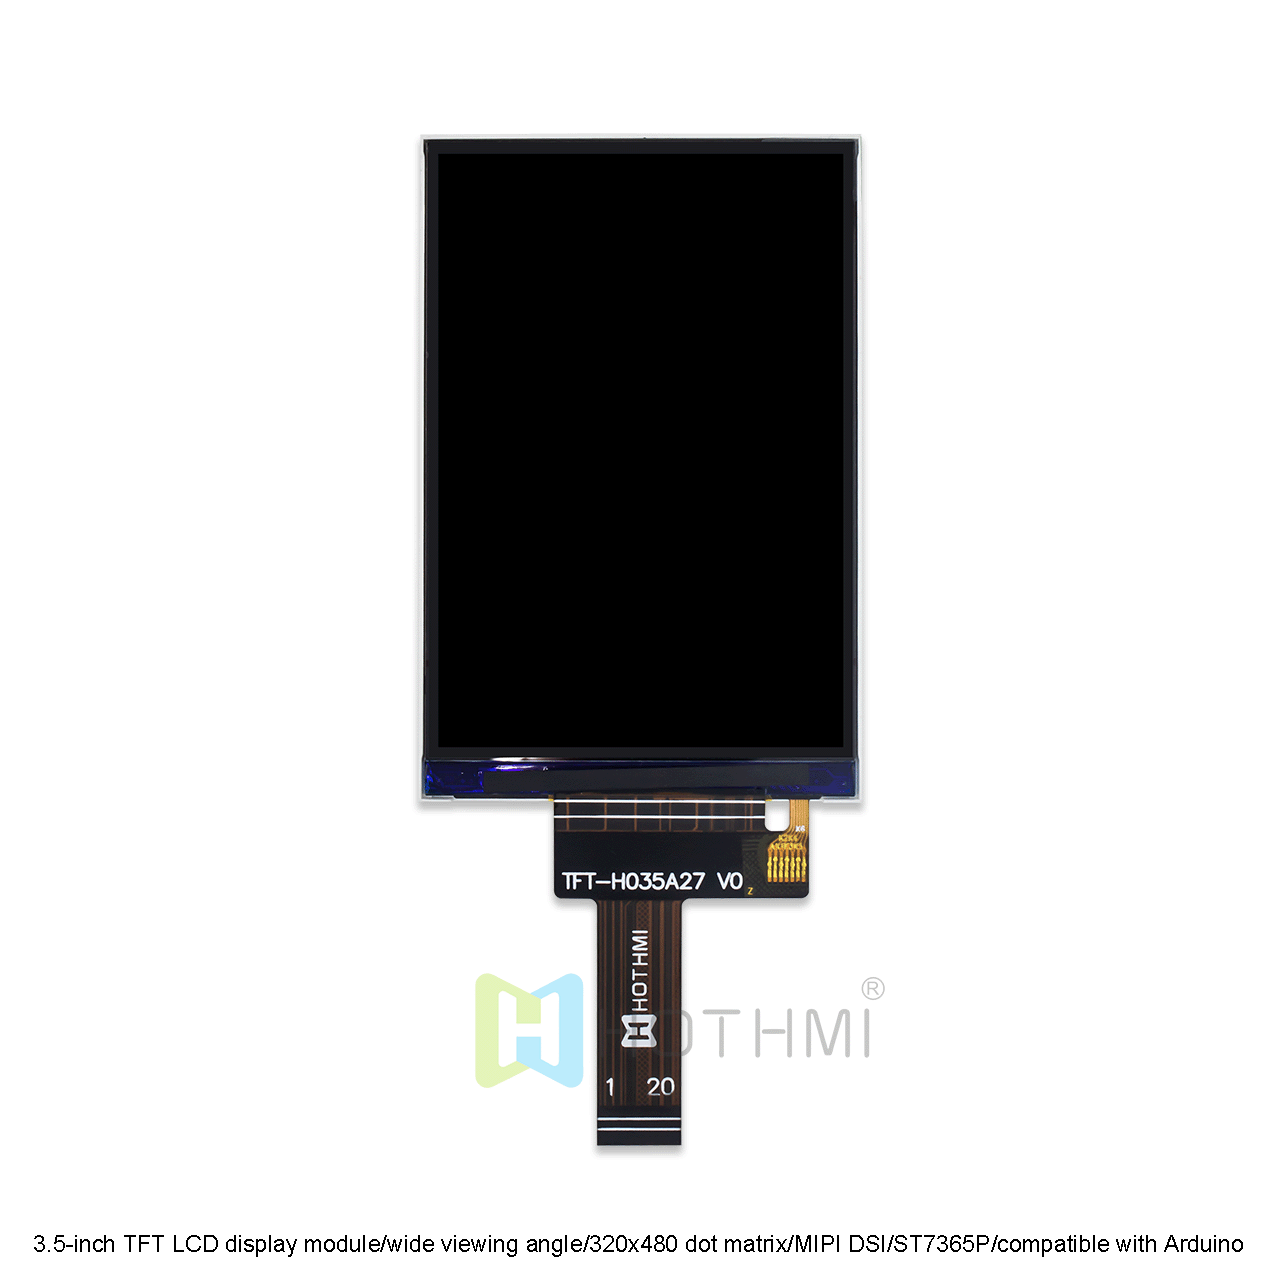 3.5 inch TFT LCD module/wide viewing angle/320x480 dots/MIPI DSI/ST7365P/sunlight readable/Android compatible